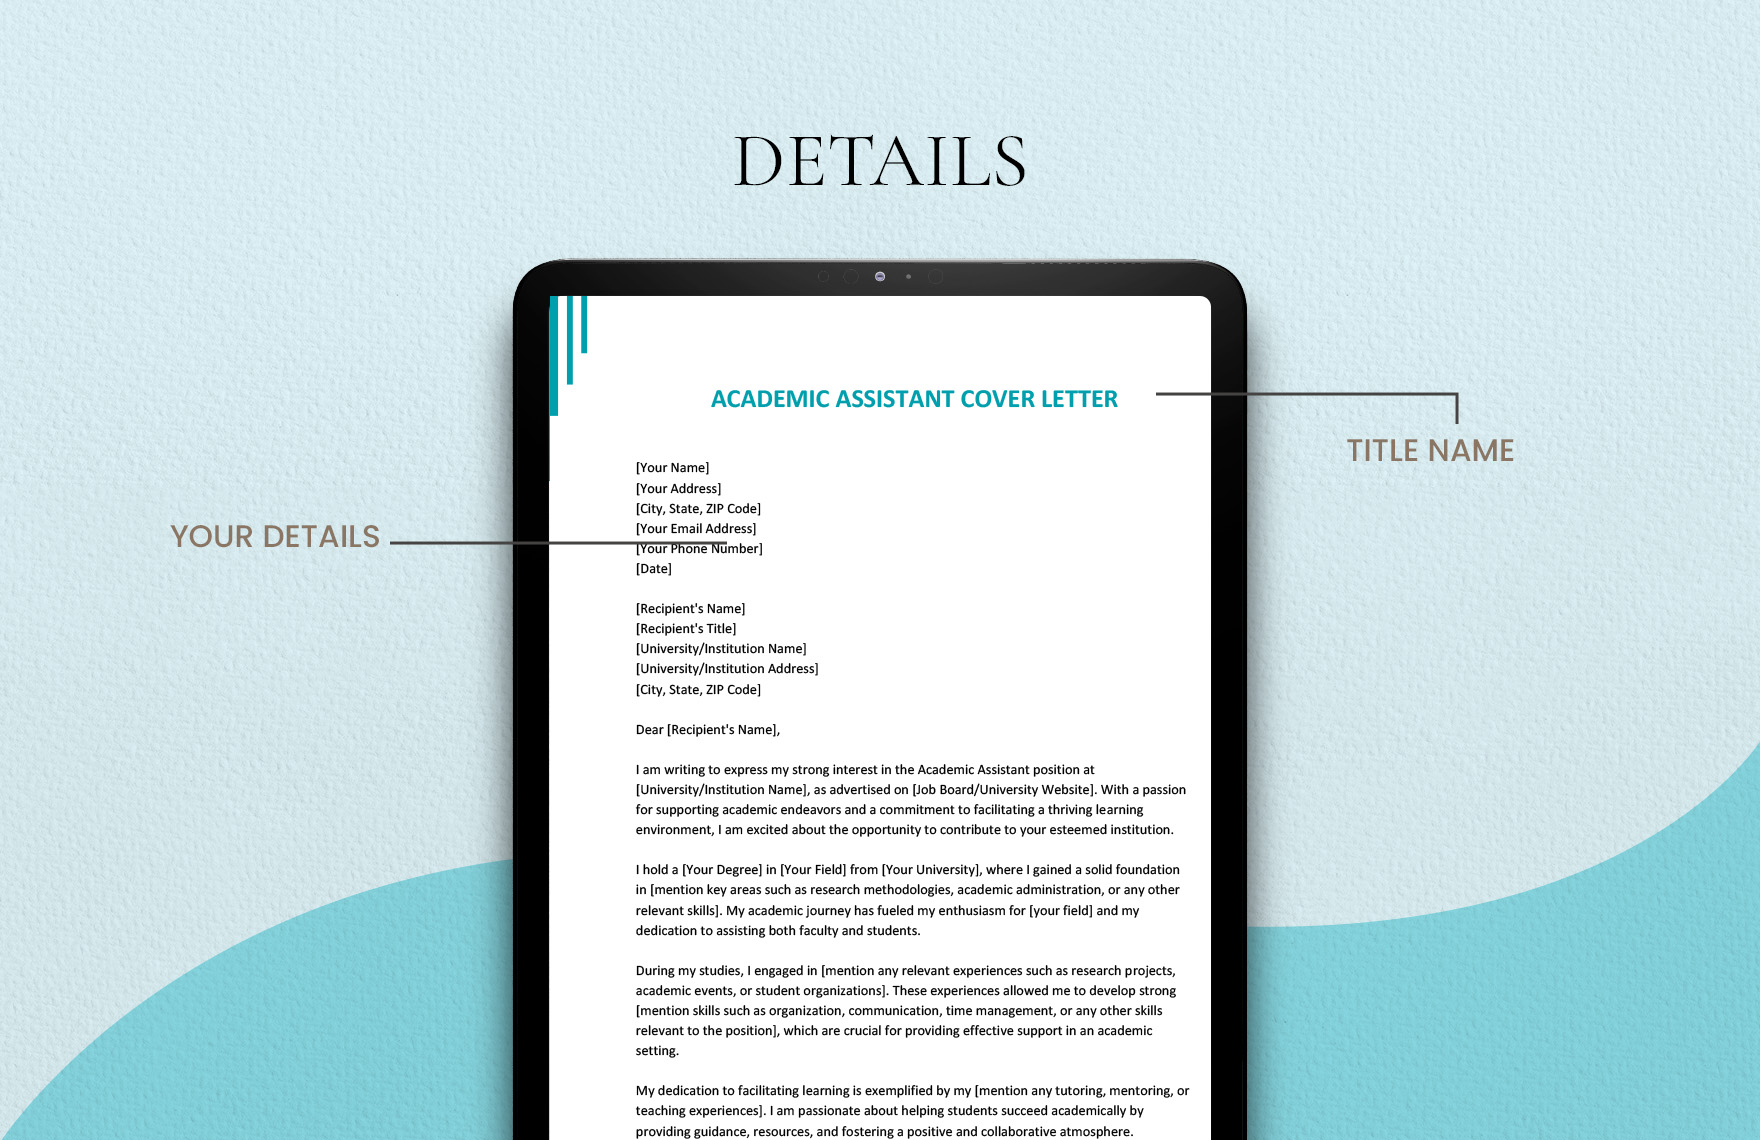 Academic Assistant Cover Letter